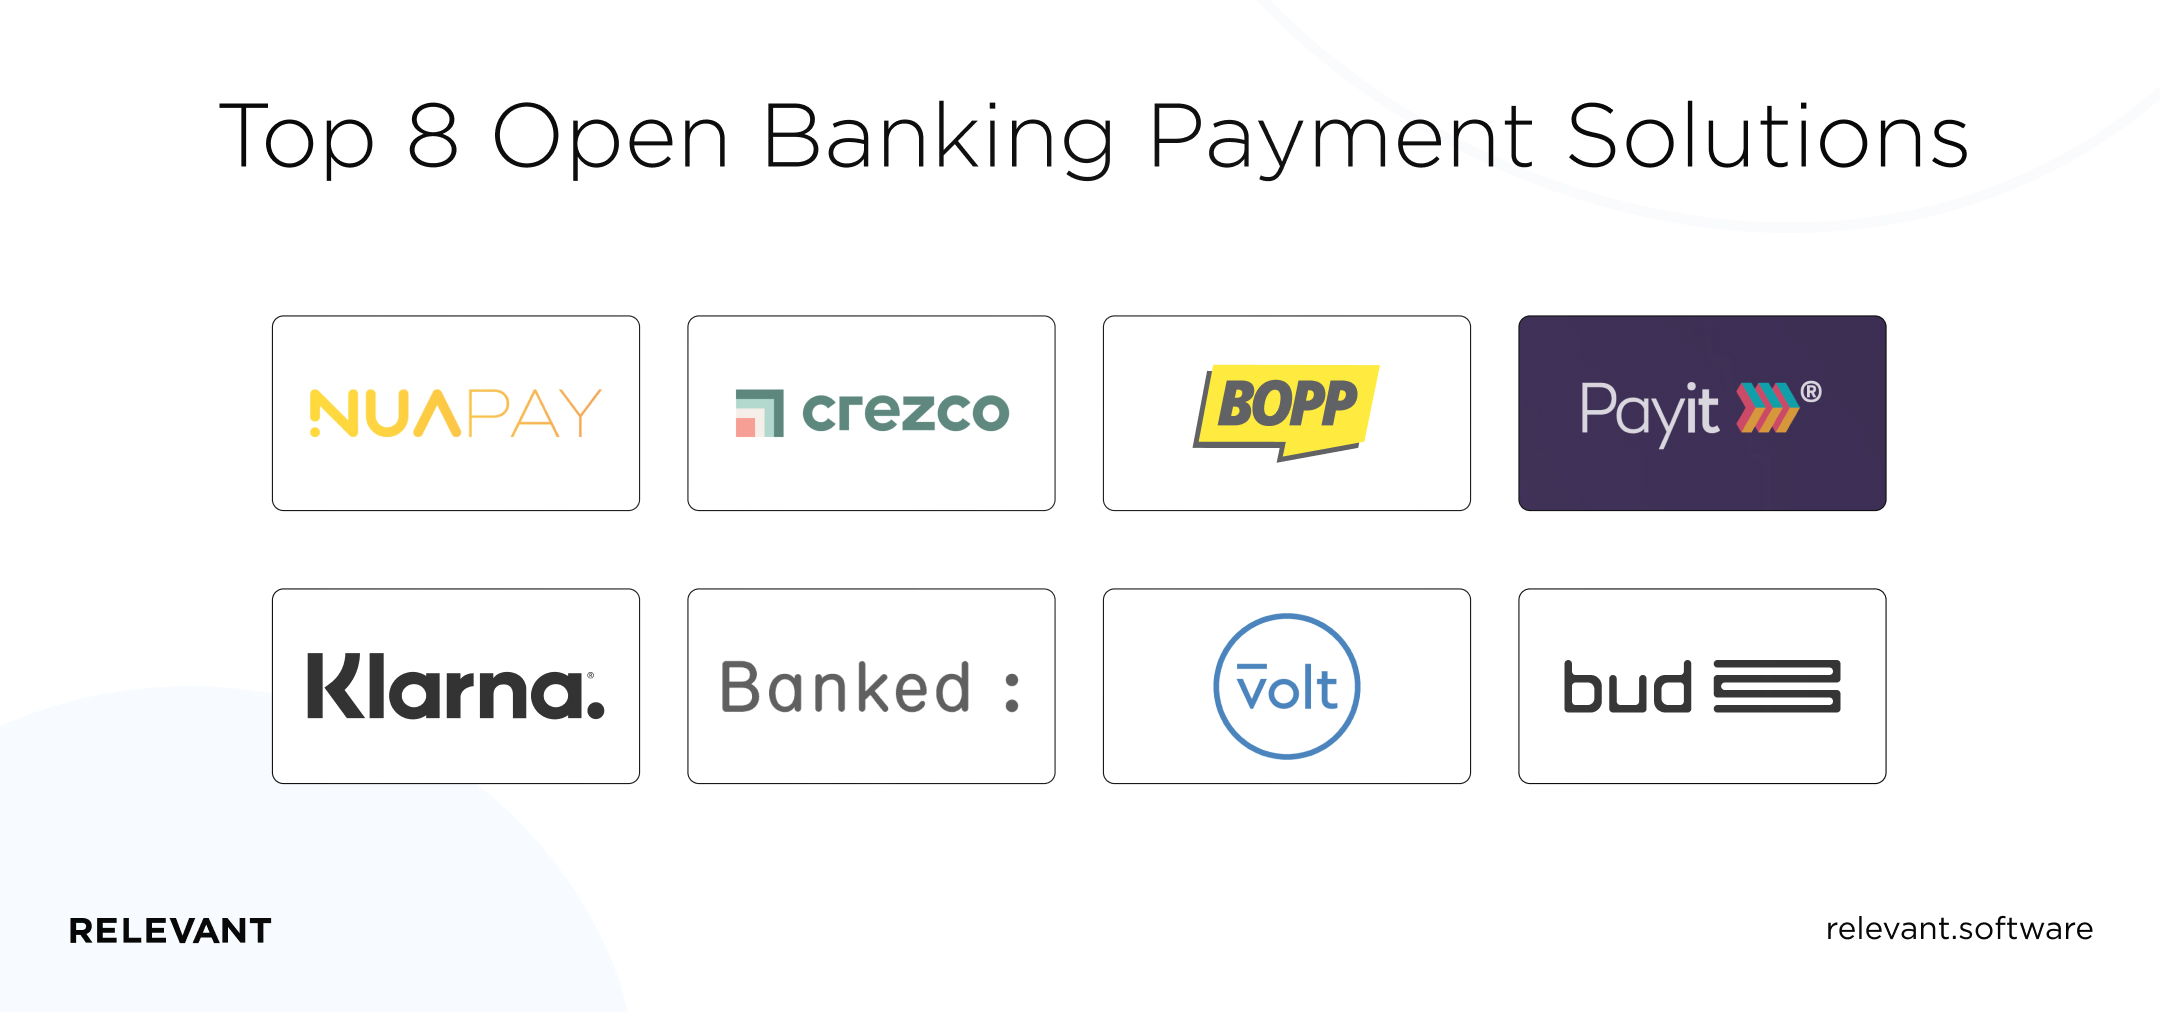 Top 8 Open Banking Payment Solutions